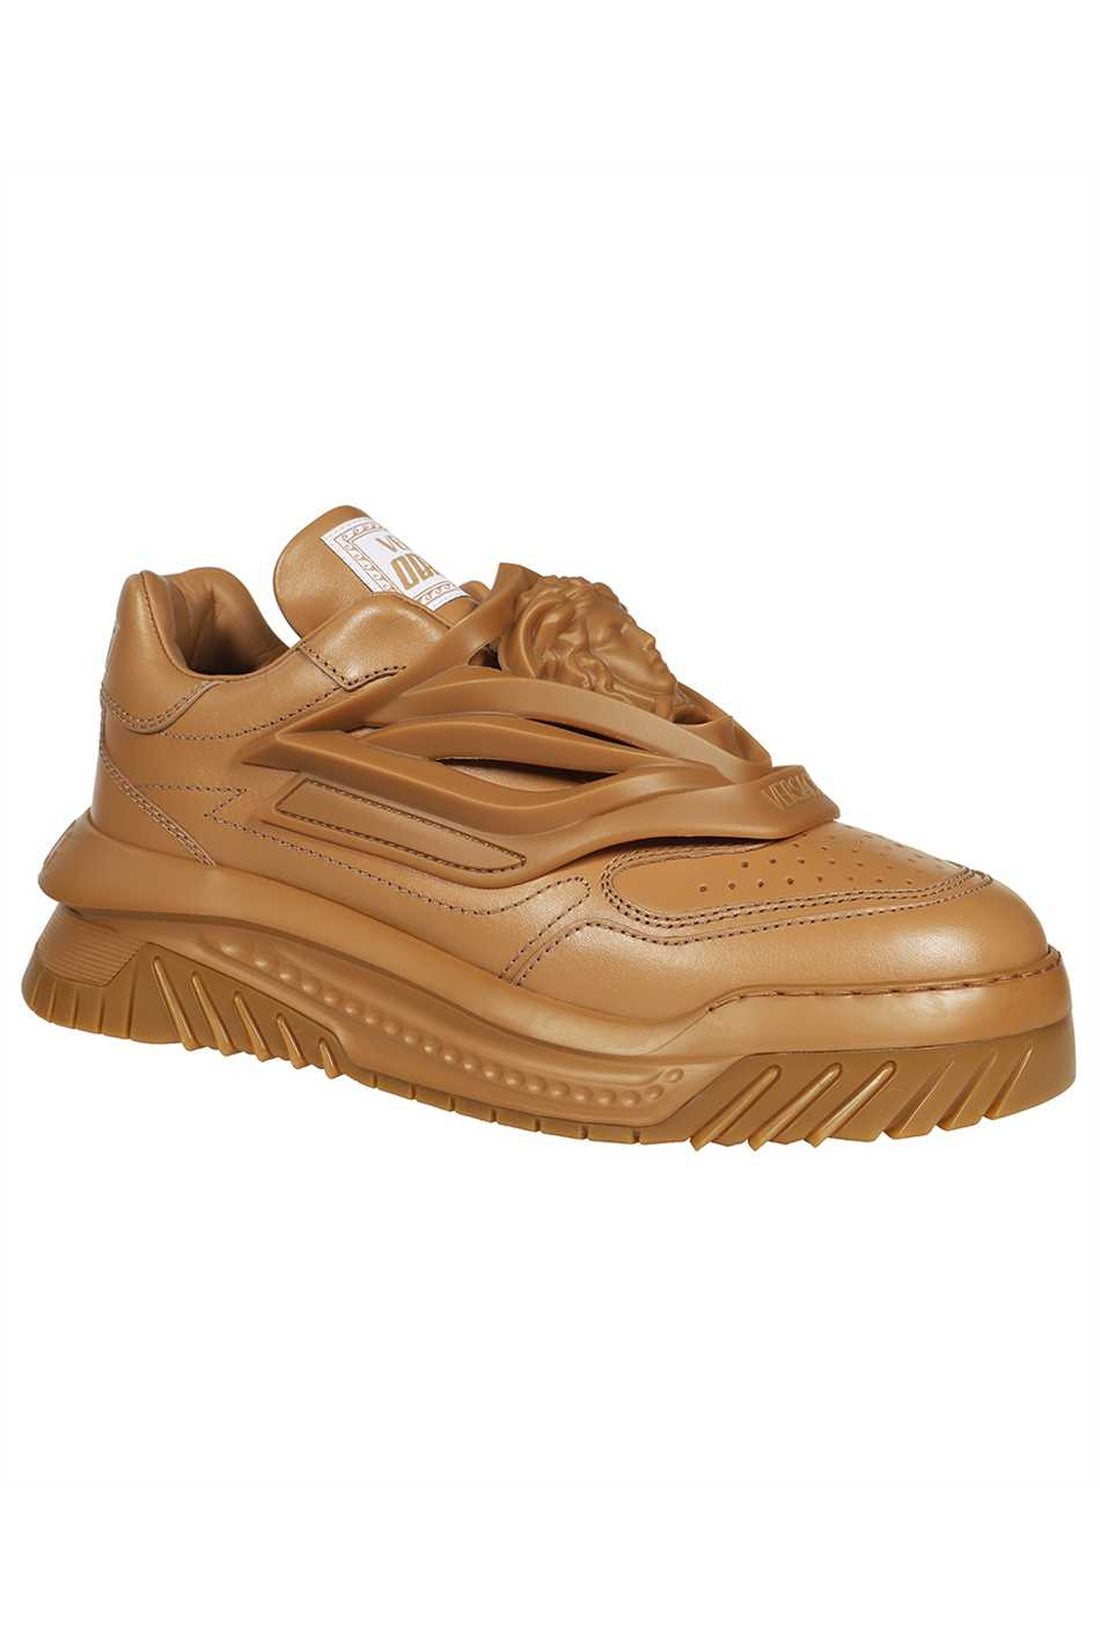 Versace-OUTLET-SALE-Odissea leather sneakers-ARCHIVIST